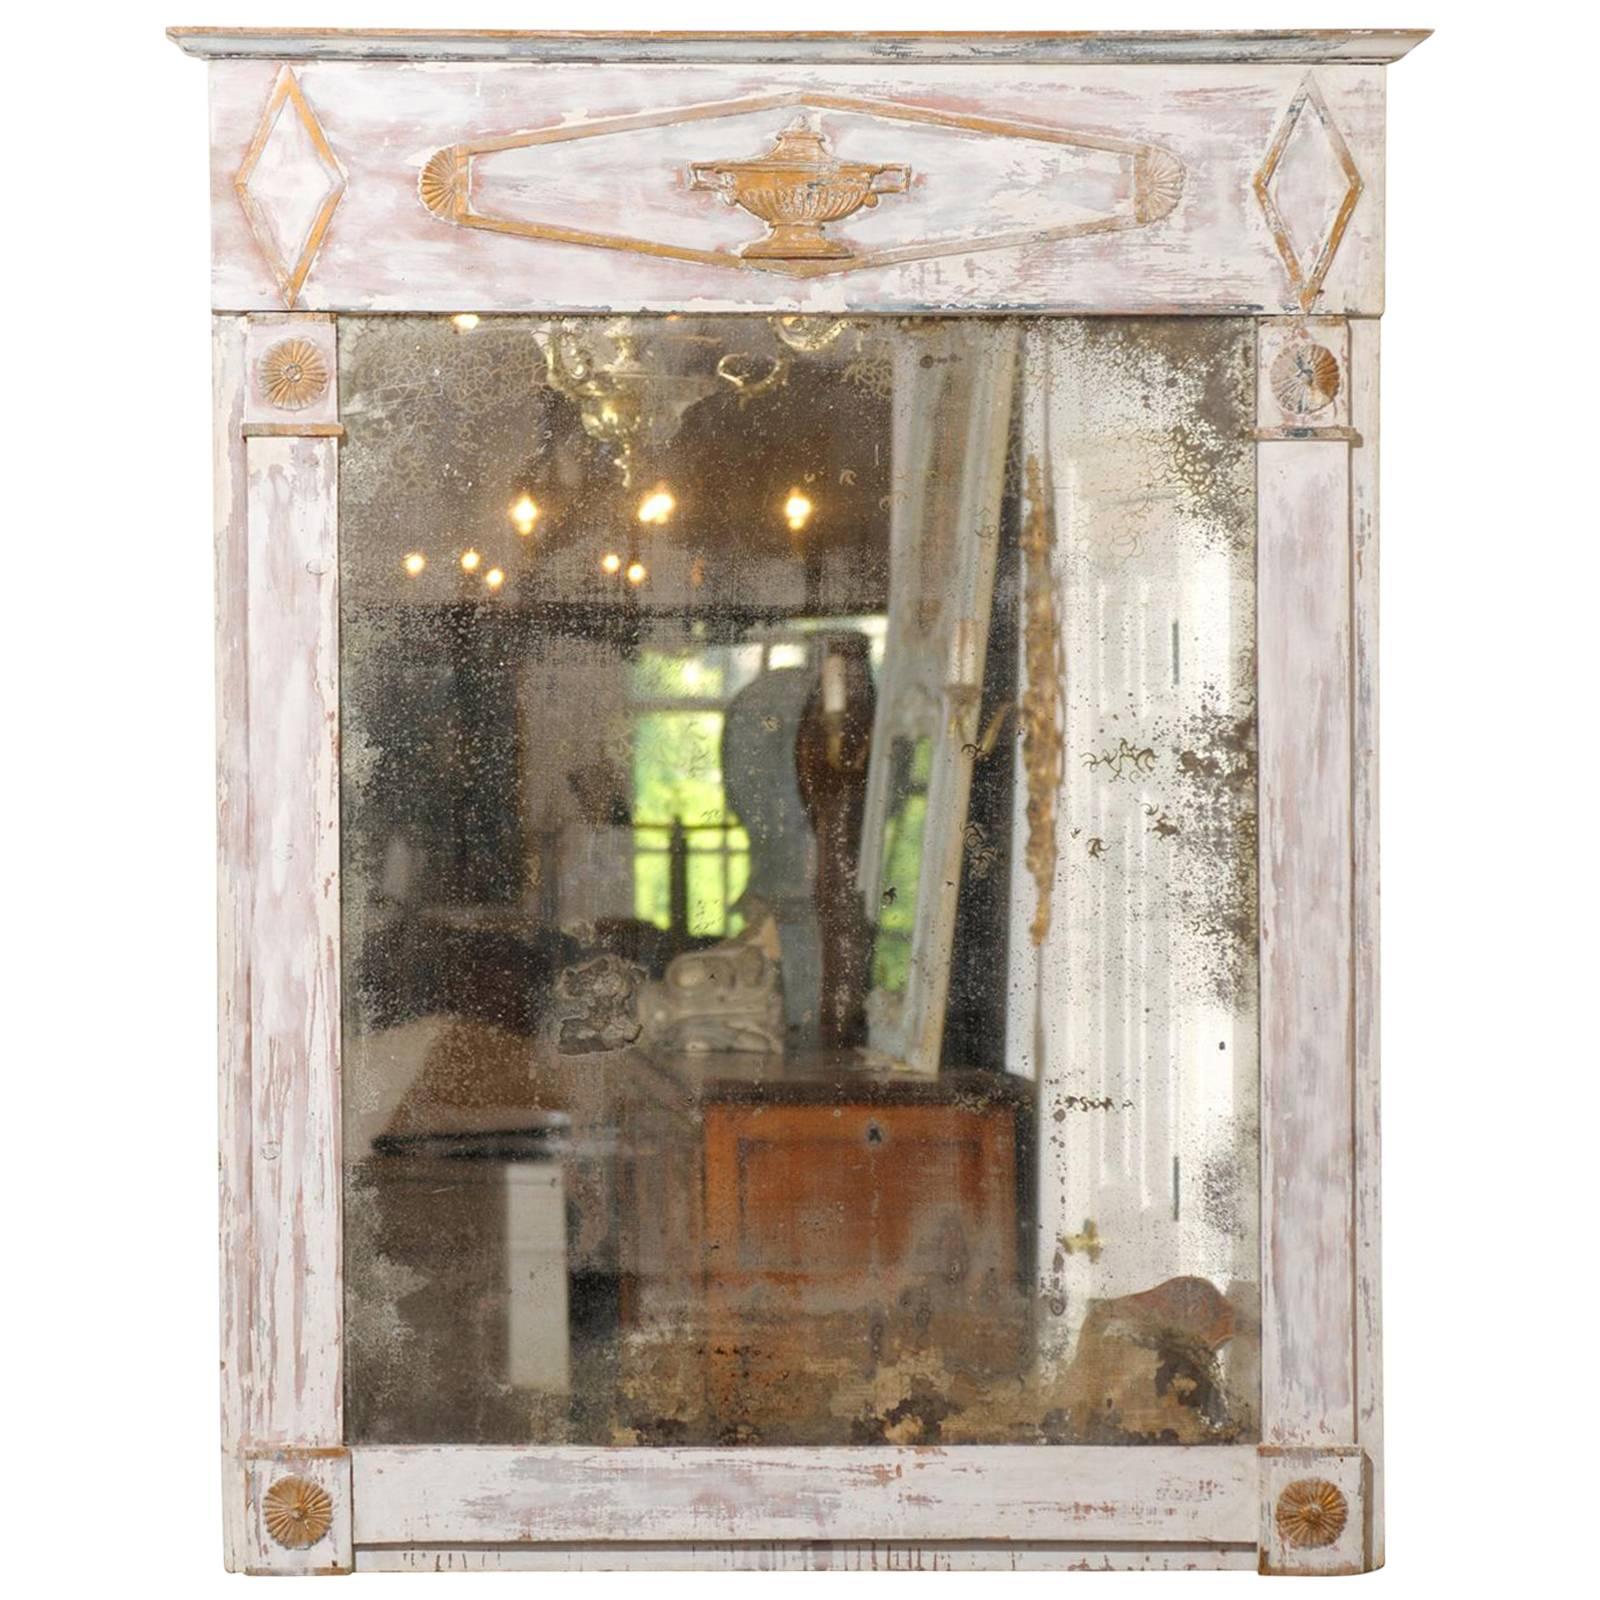 French Period Directoire Trumeau Mirror with Distressed Paint, Late 18th Century For Sale